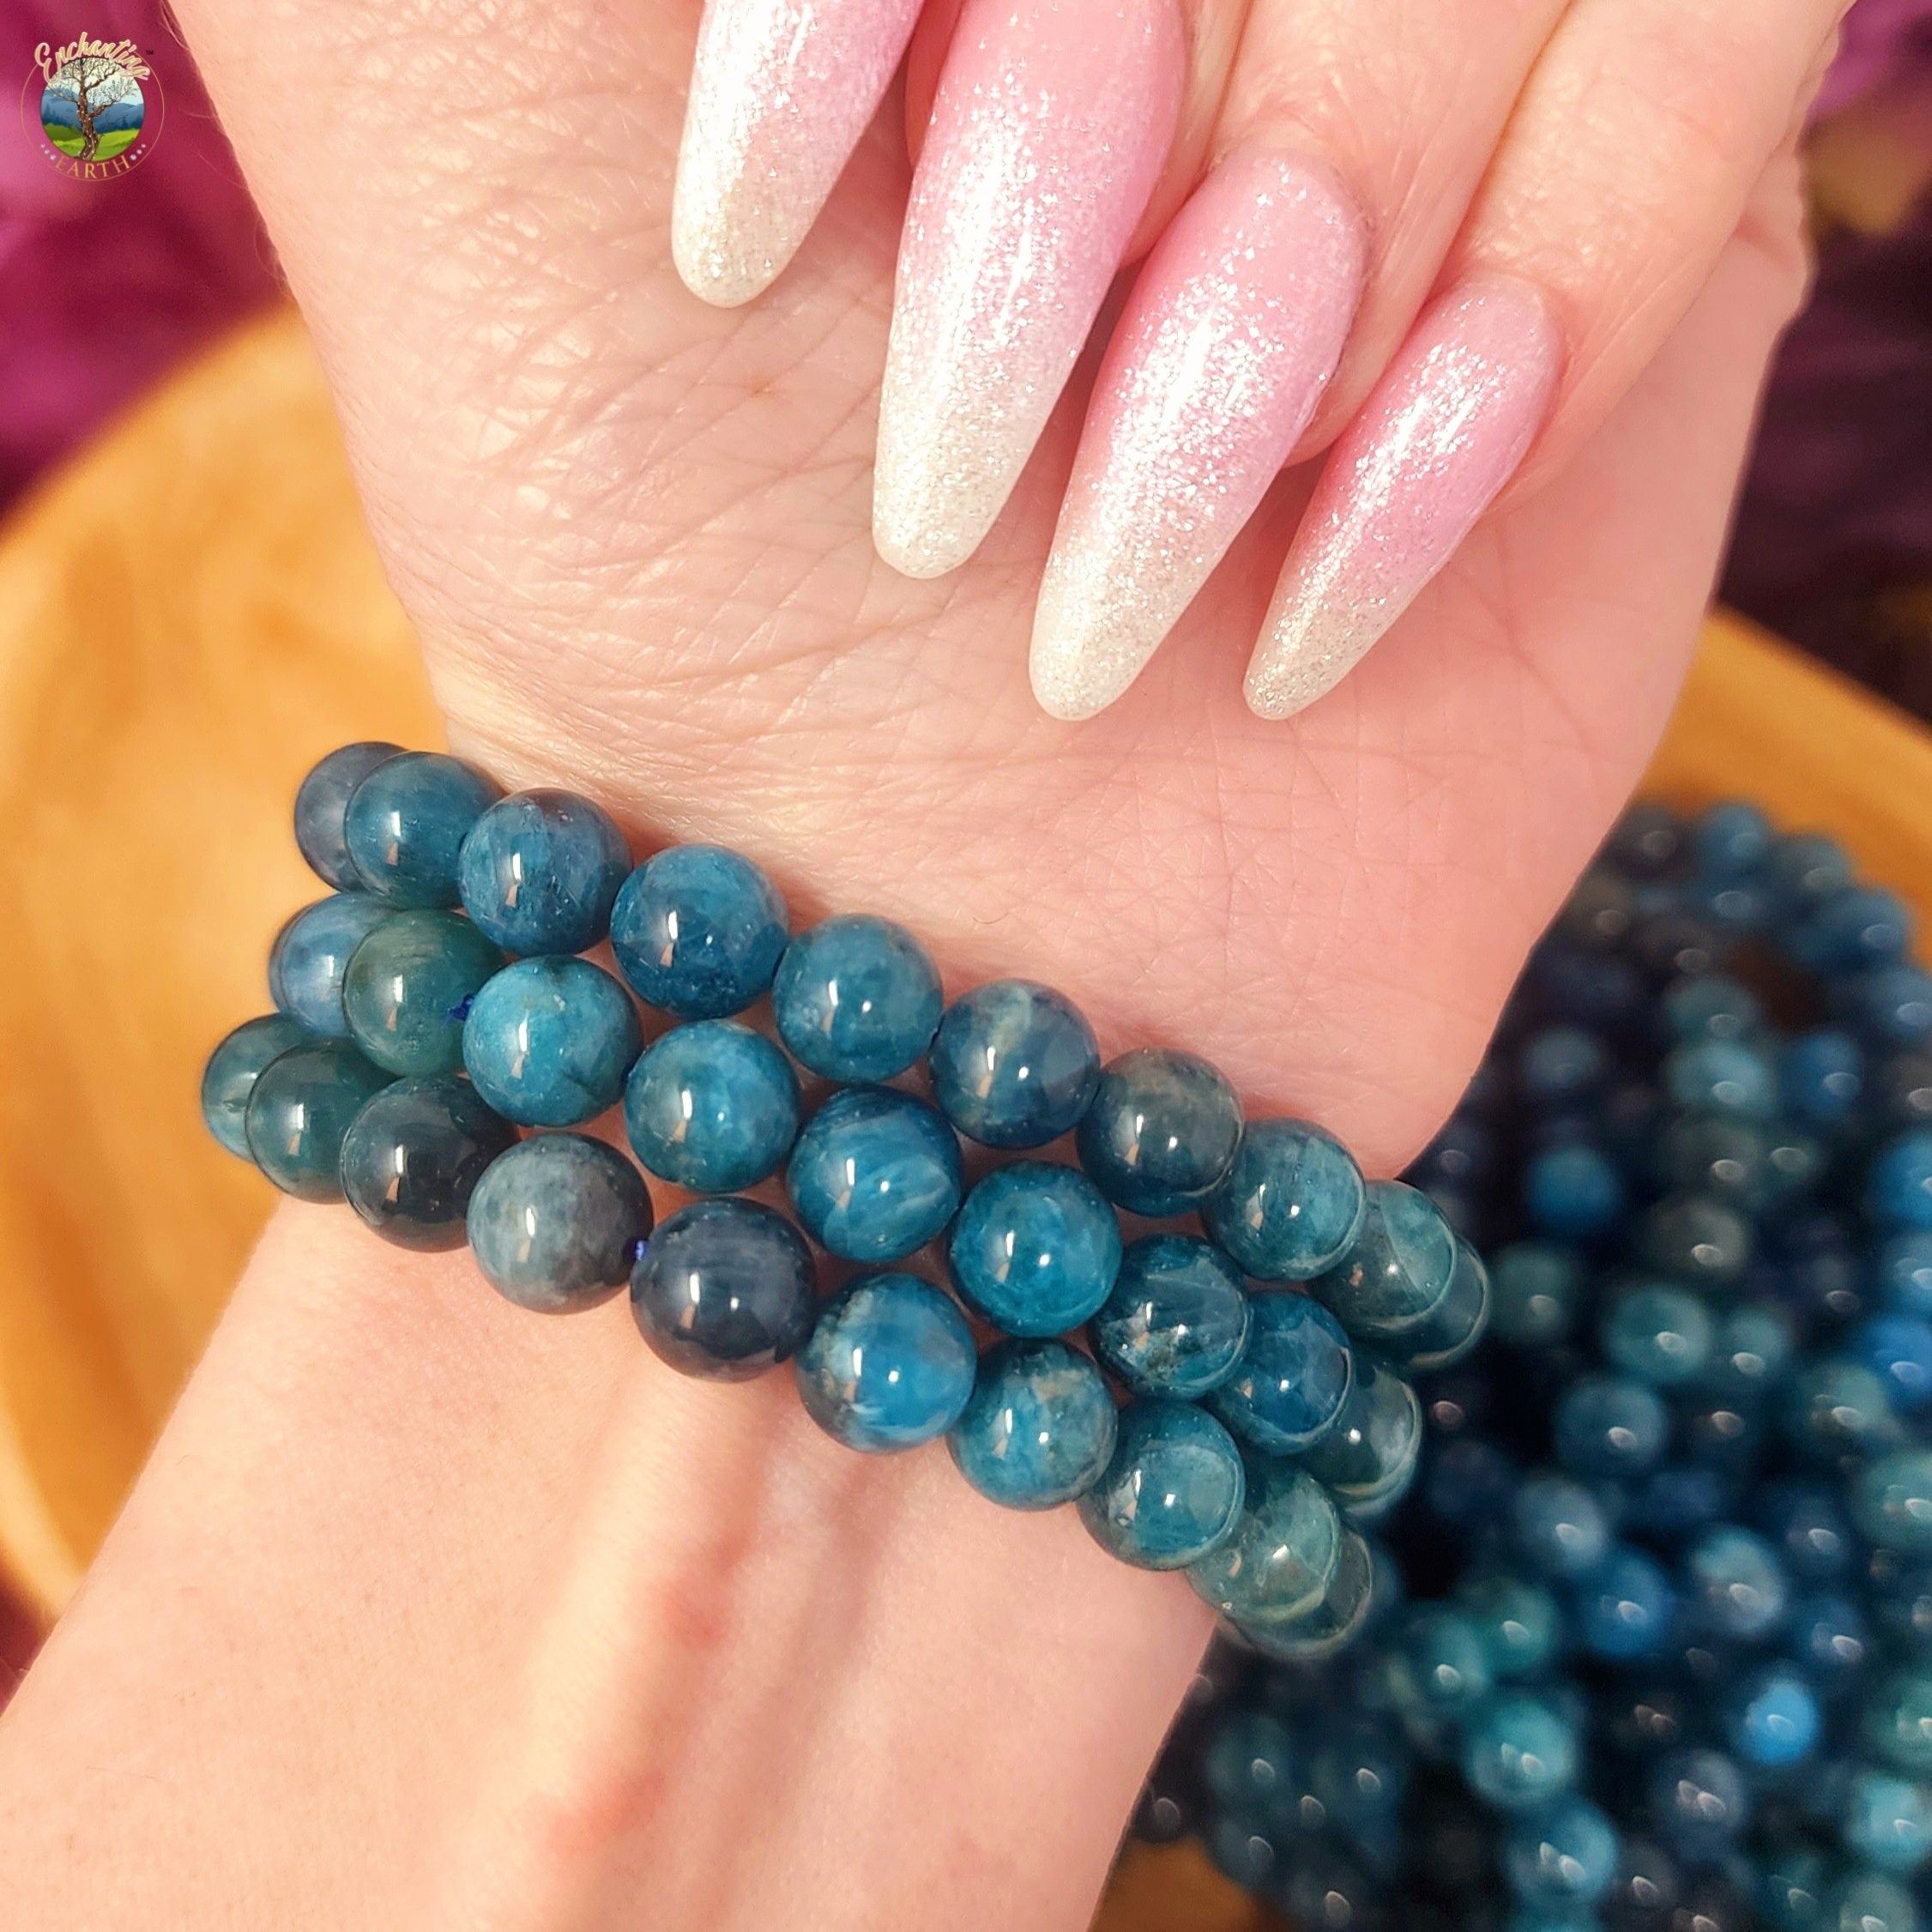 Blue Apatite Bracelet for Connection, Healthy Weight Loss and Overall Wellness